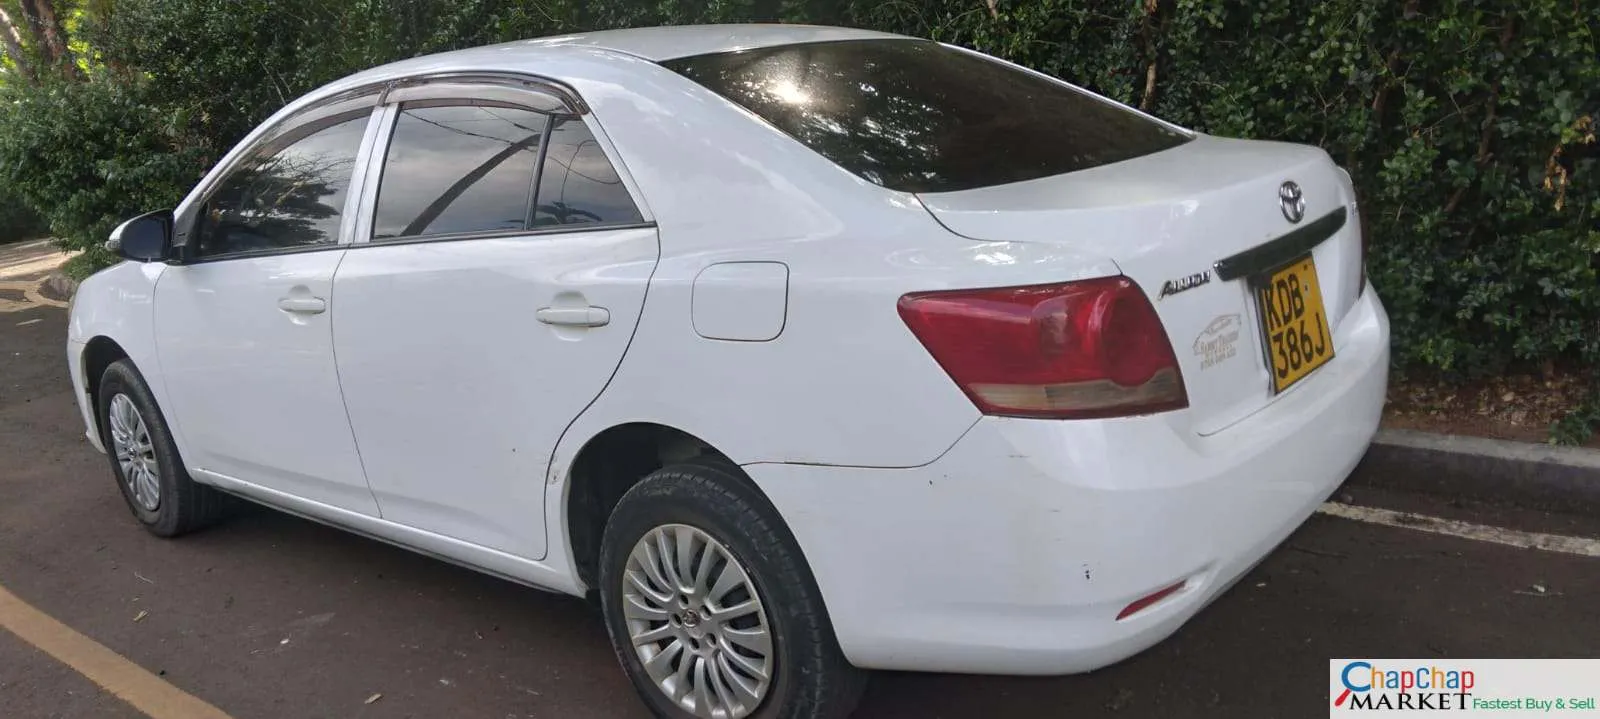 Toyota Allion kenya You Pay 30% Deposit 70% INSTALLMENTS Allion for sale in kenya hire purchase installments EXCLUSIVE Trade in OK 🔥